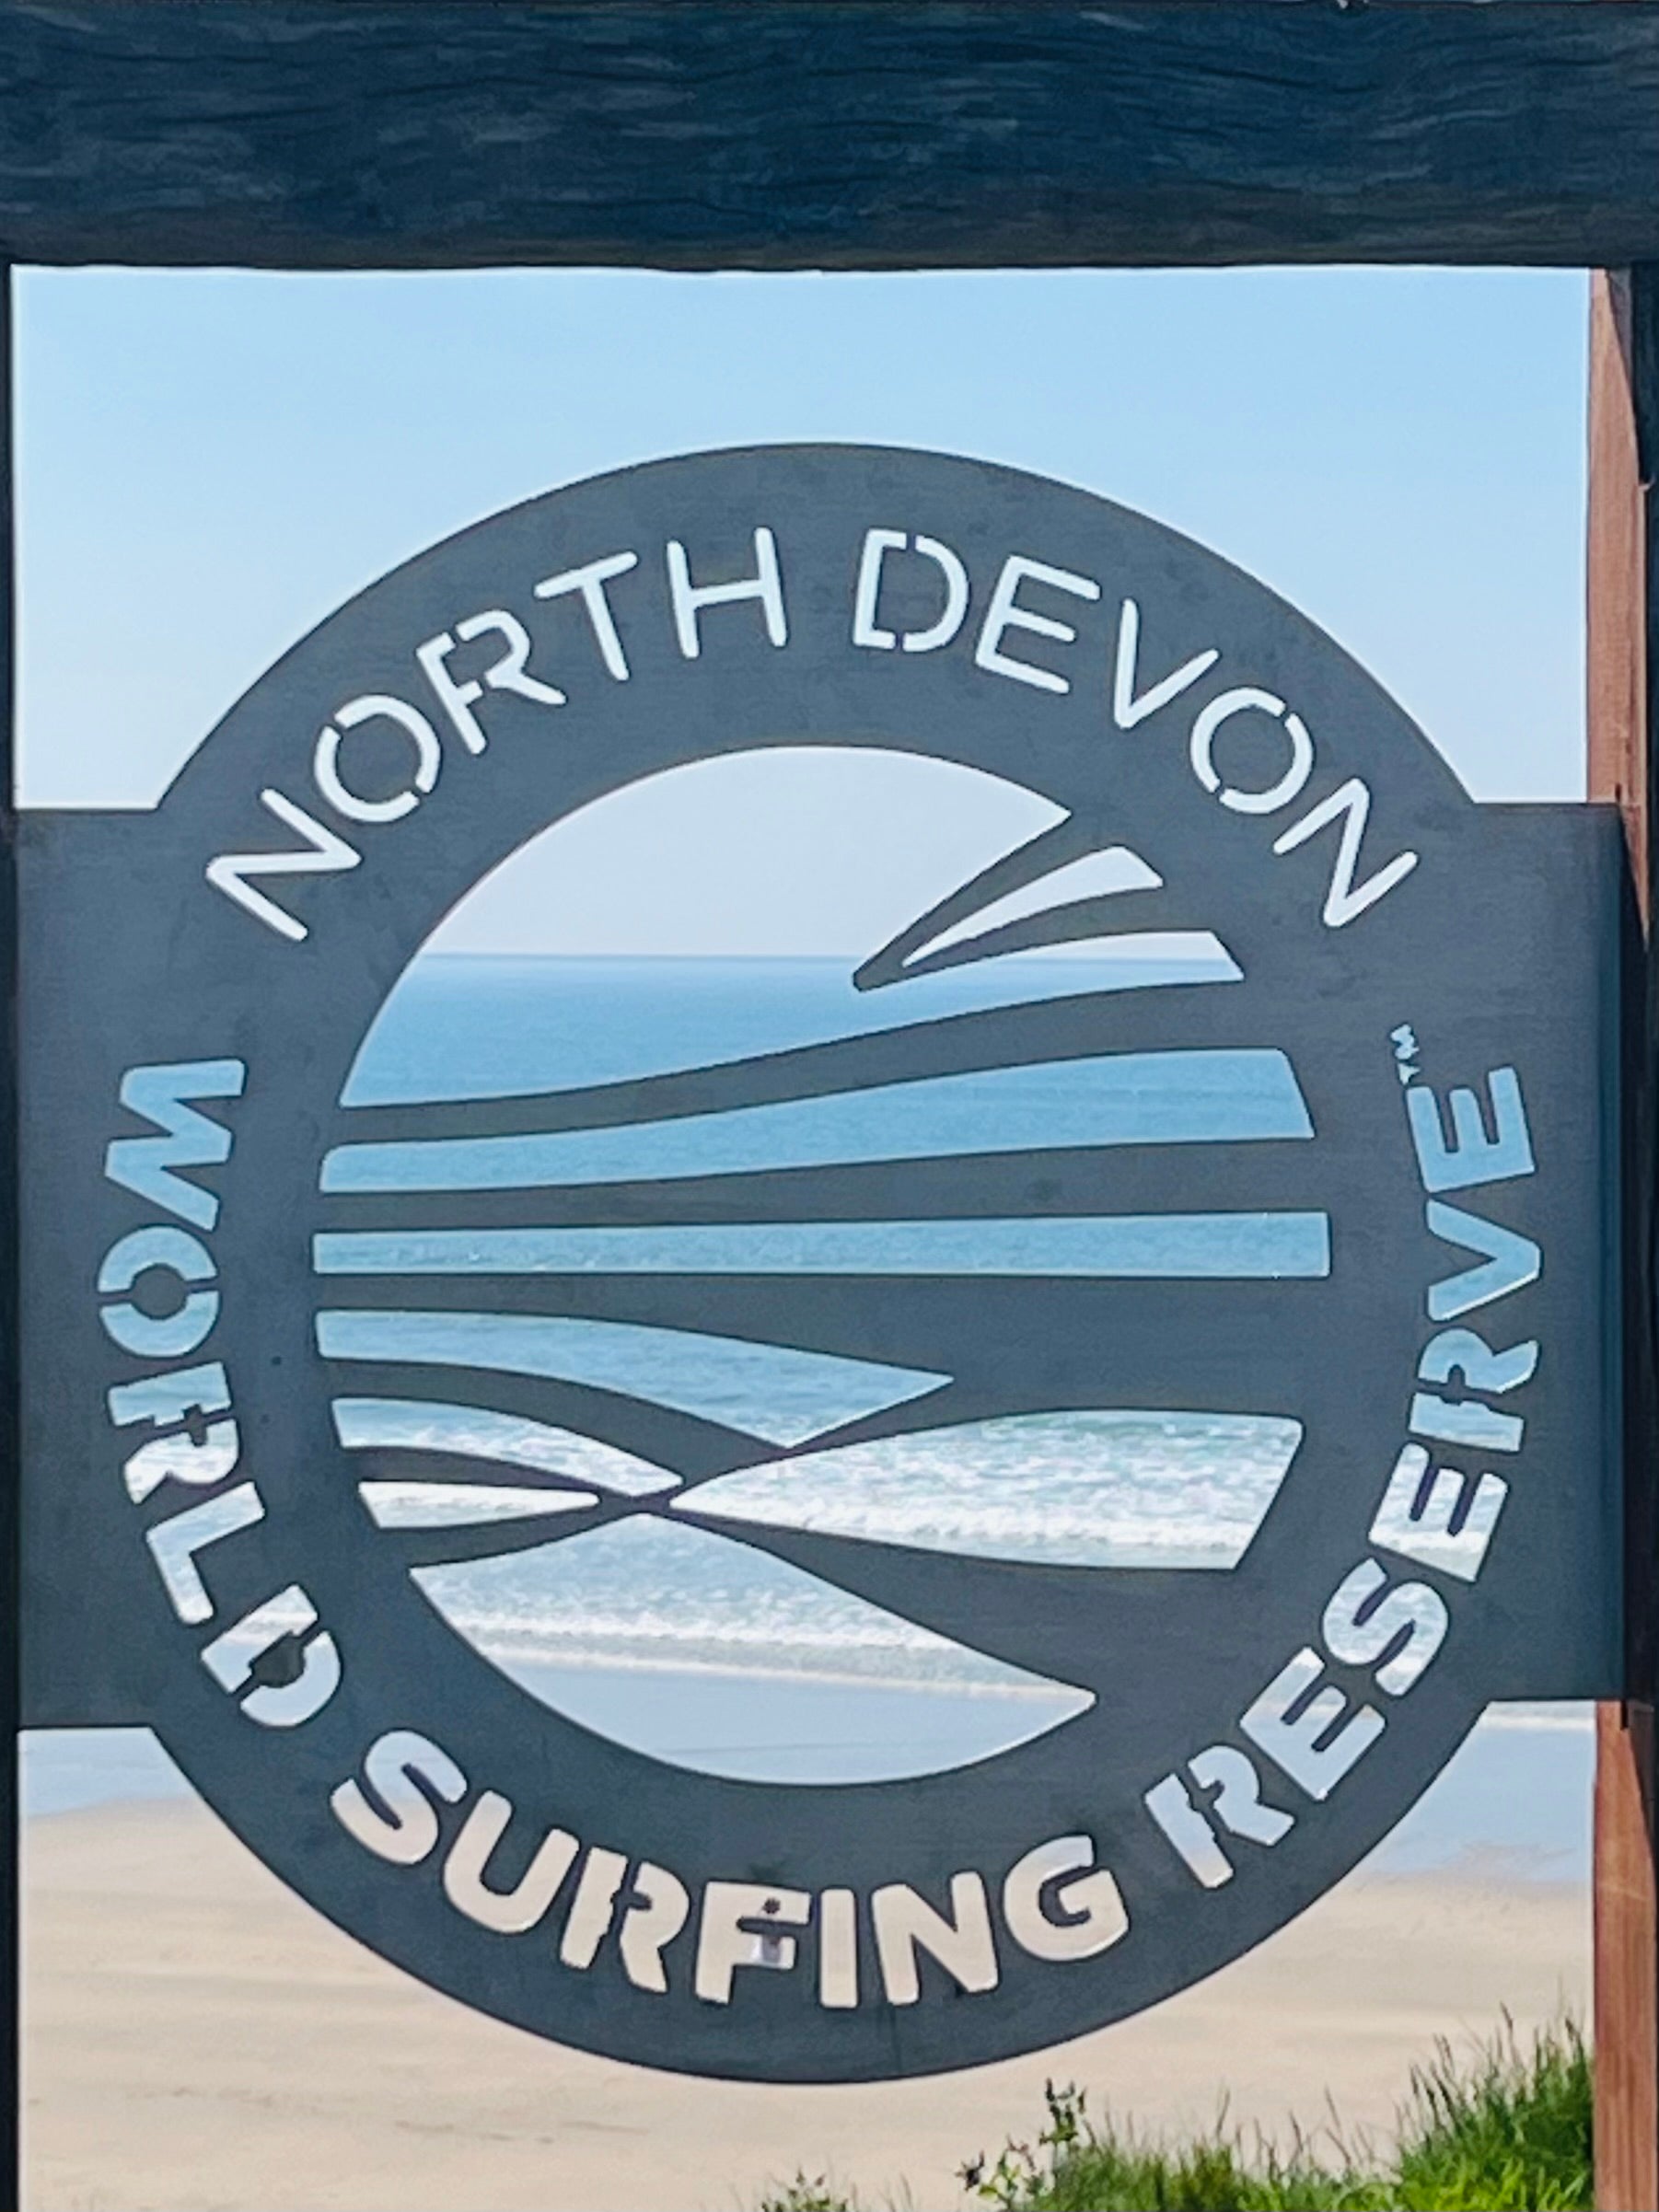 North Devon has recently been named the 12th World Surfing Reserve